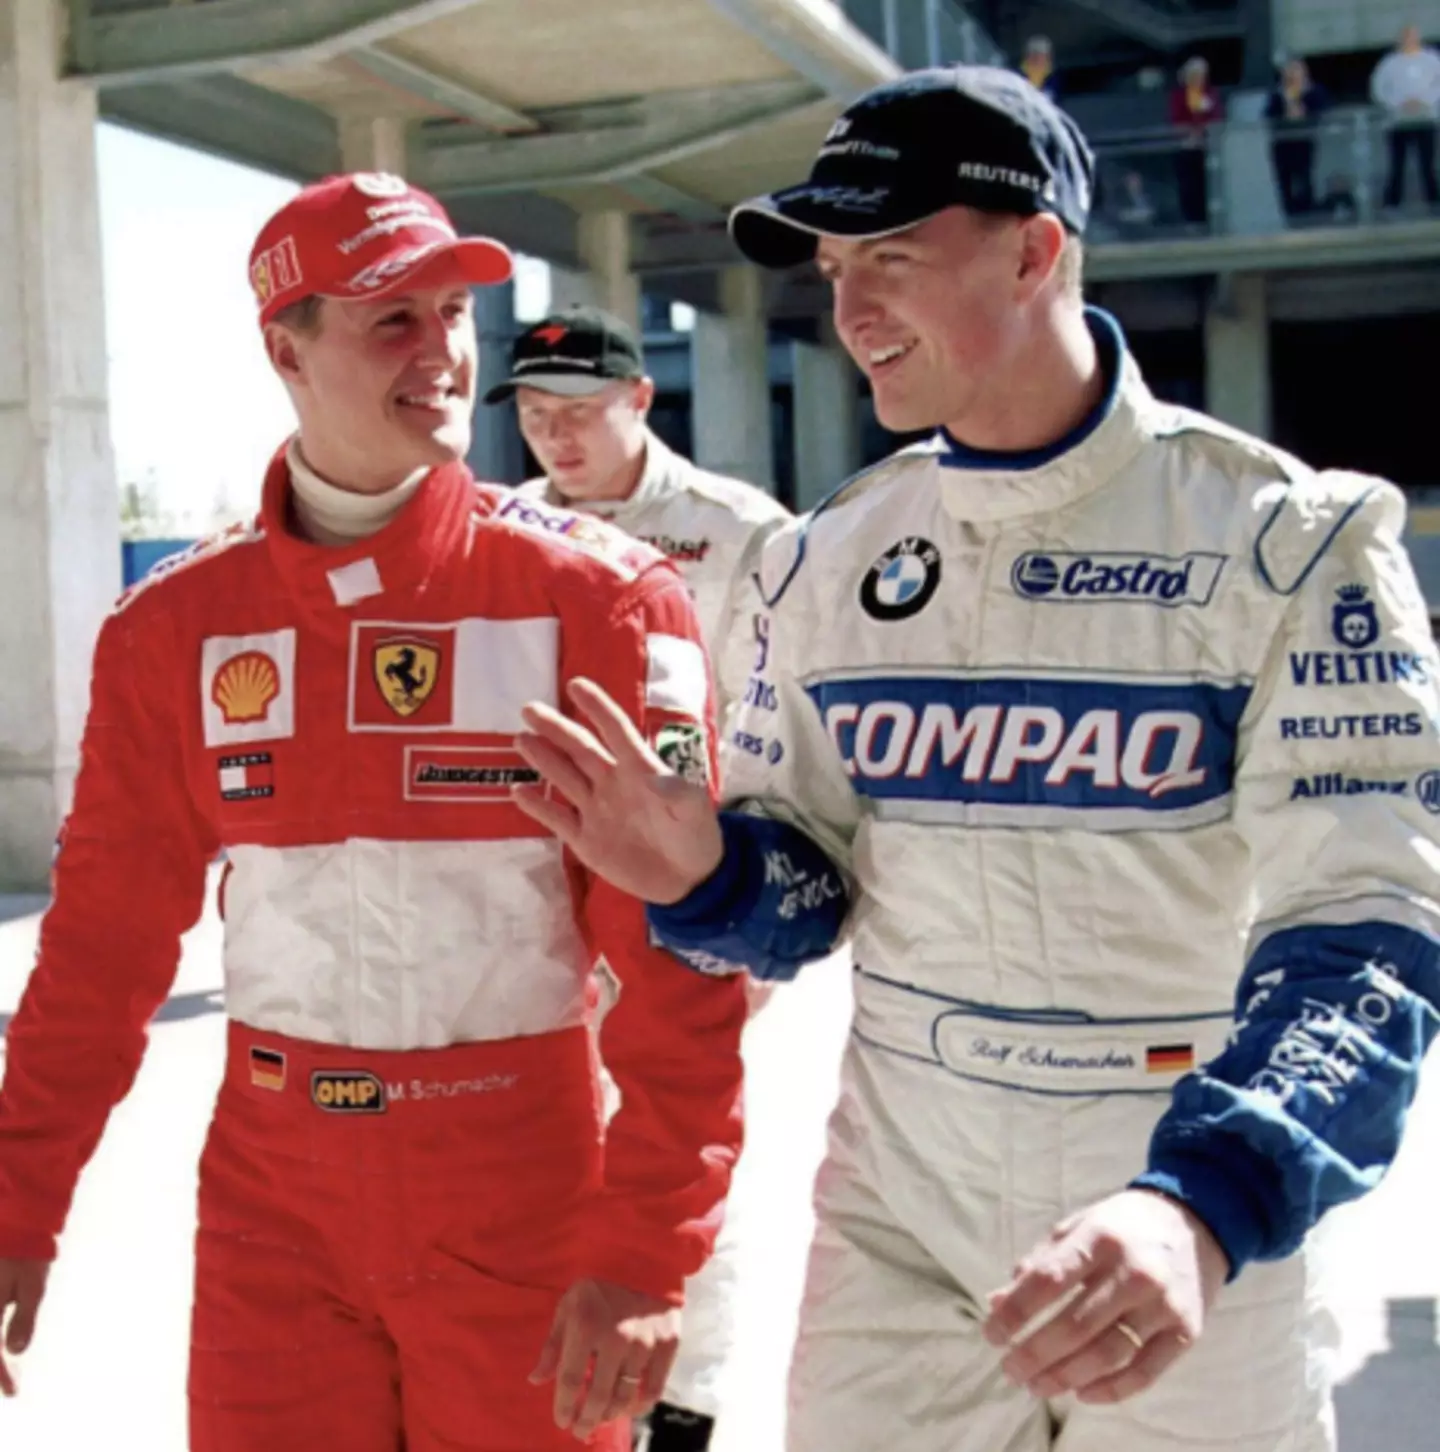 Michael Schumacher (left) with brother Ralf.